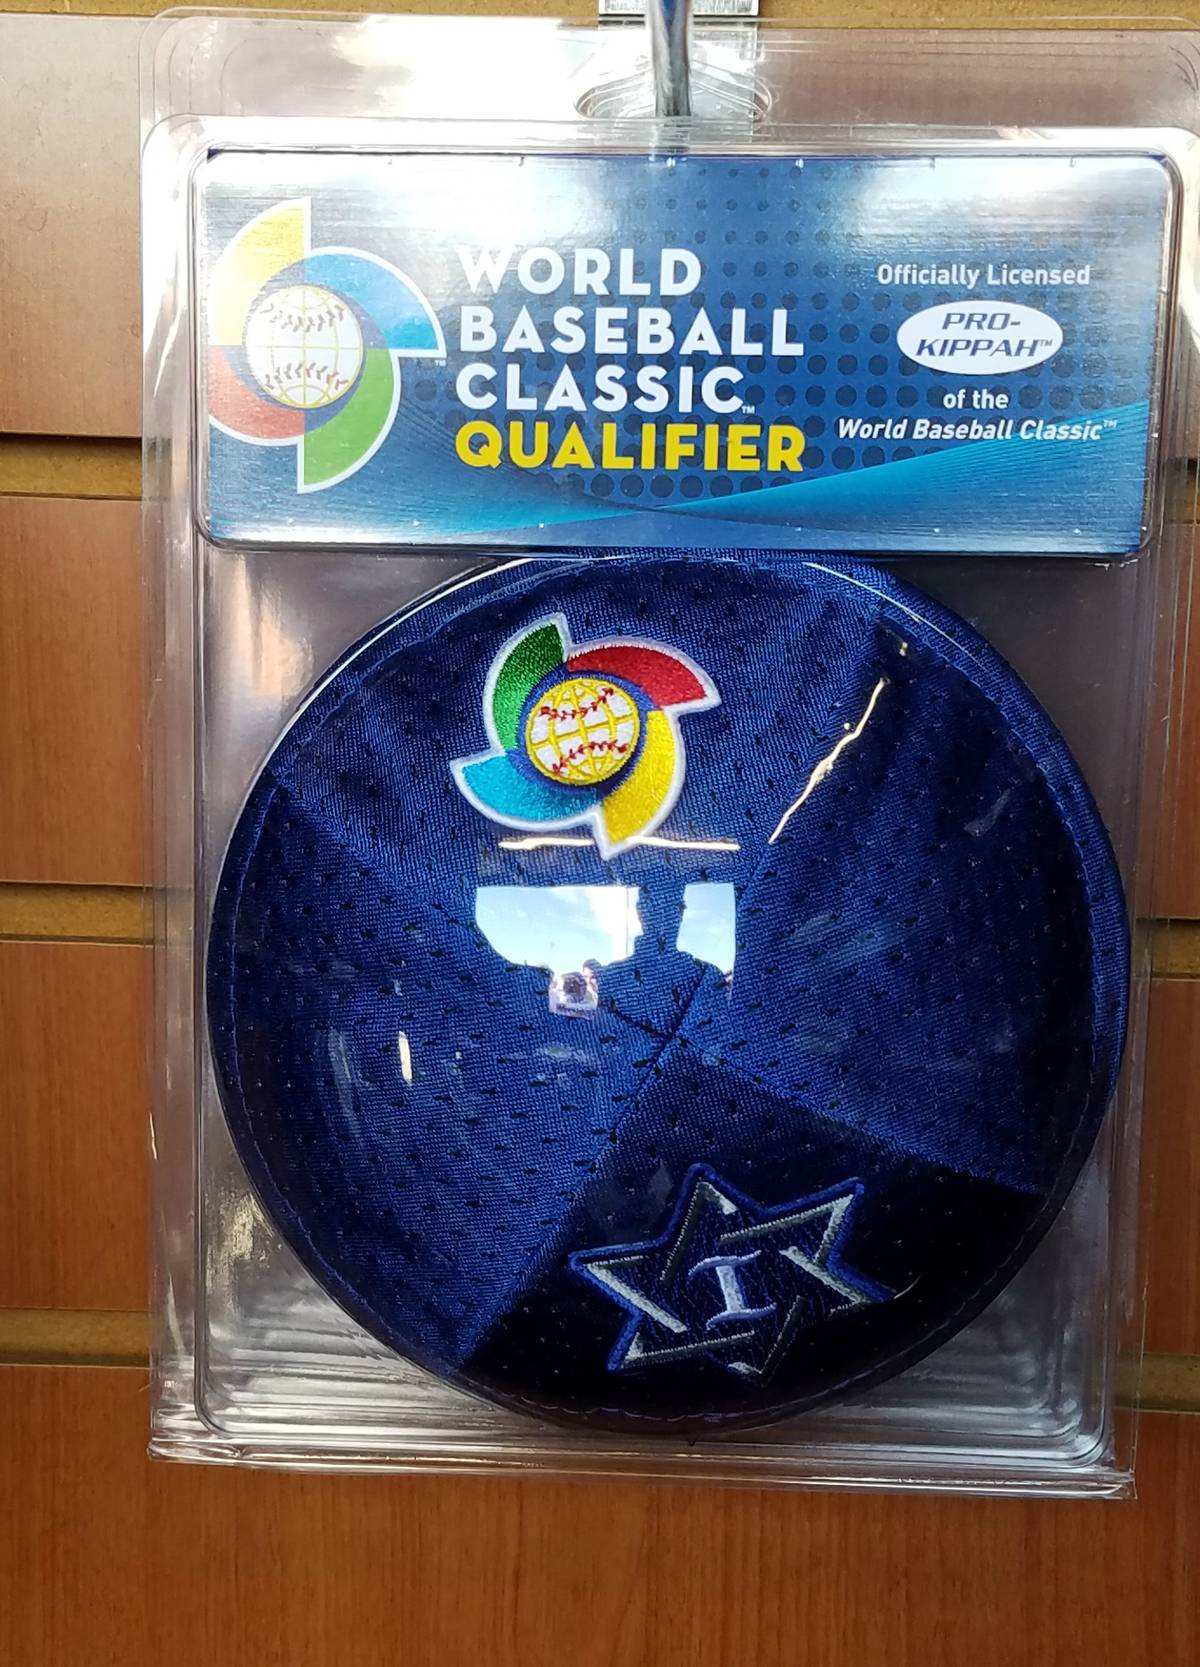 An official Israel WBC kippah could be yours for $25.